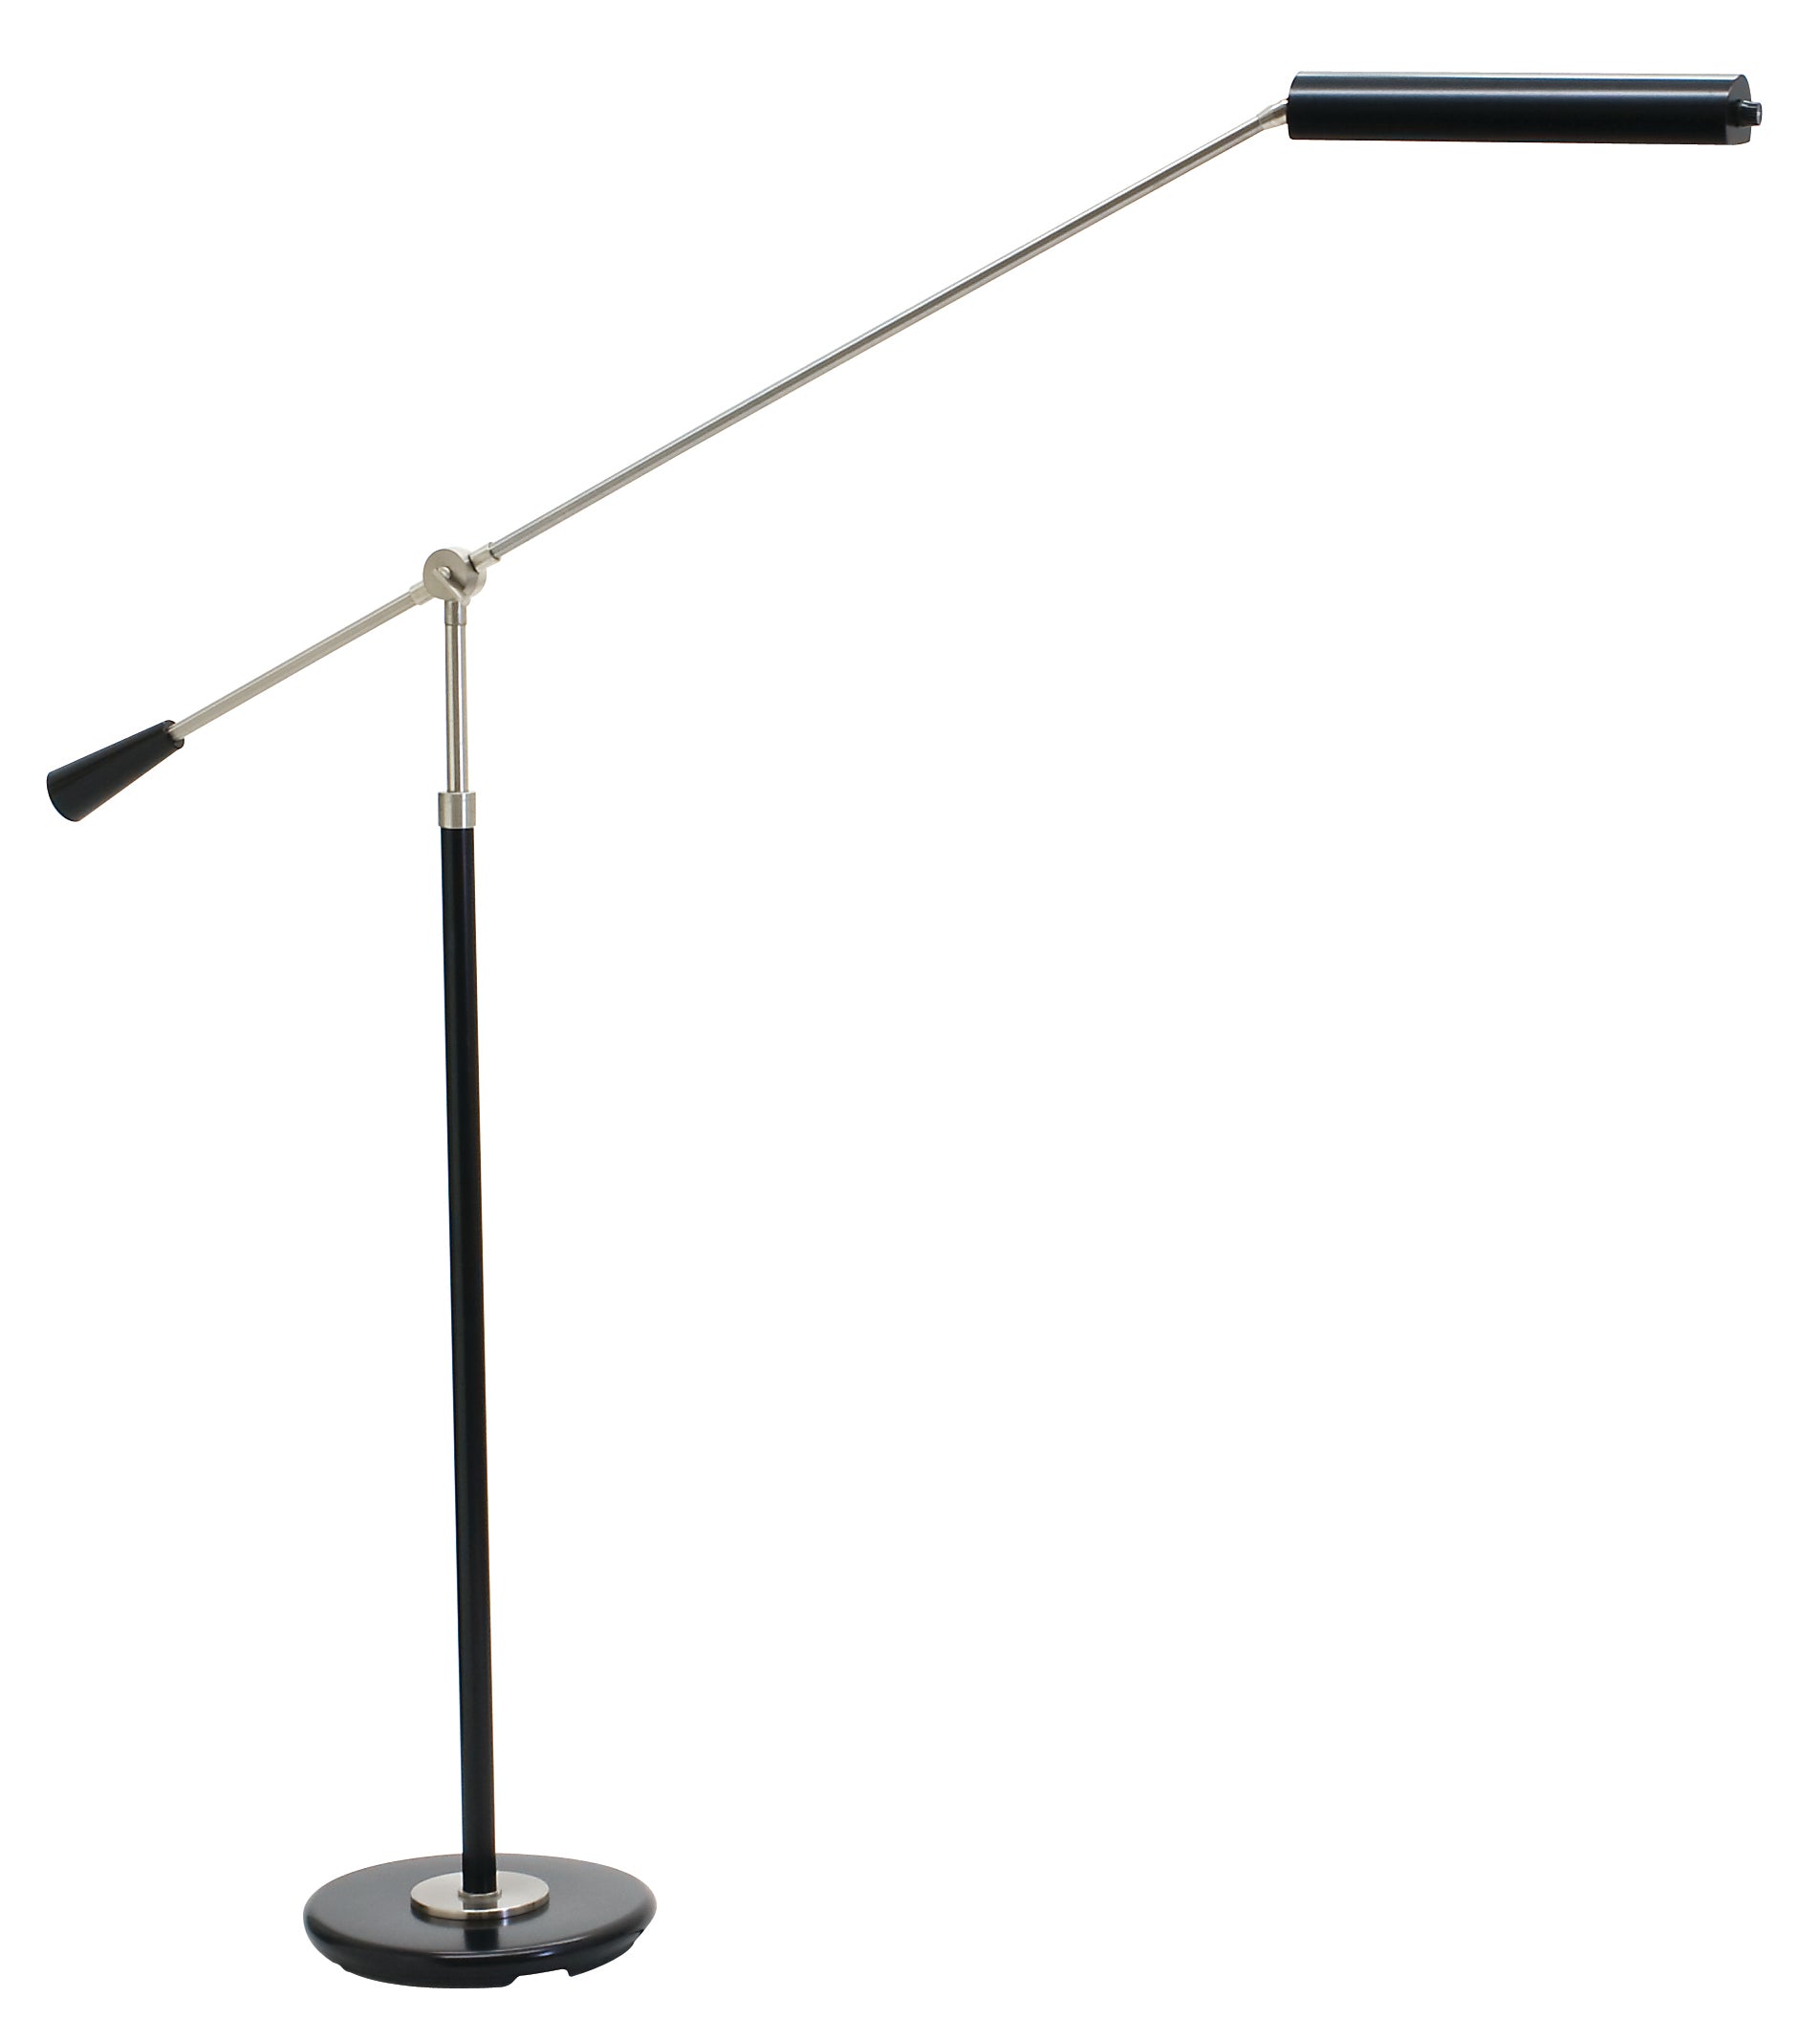 House of Troy Grand Piano Counter Balance LED Floor Lamp Black Satin Nickel Accents PFLED-527